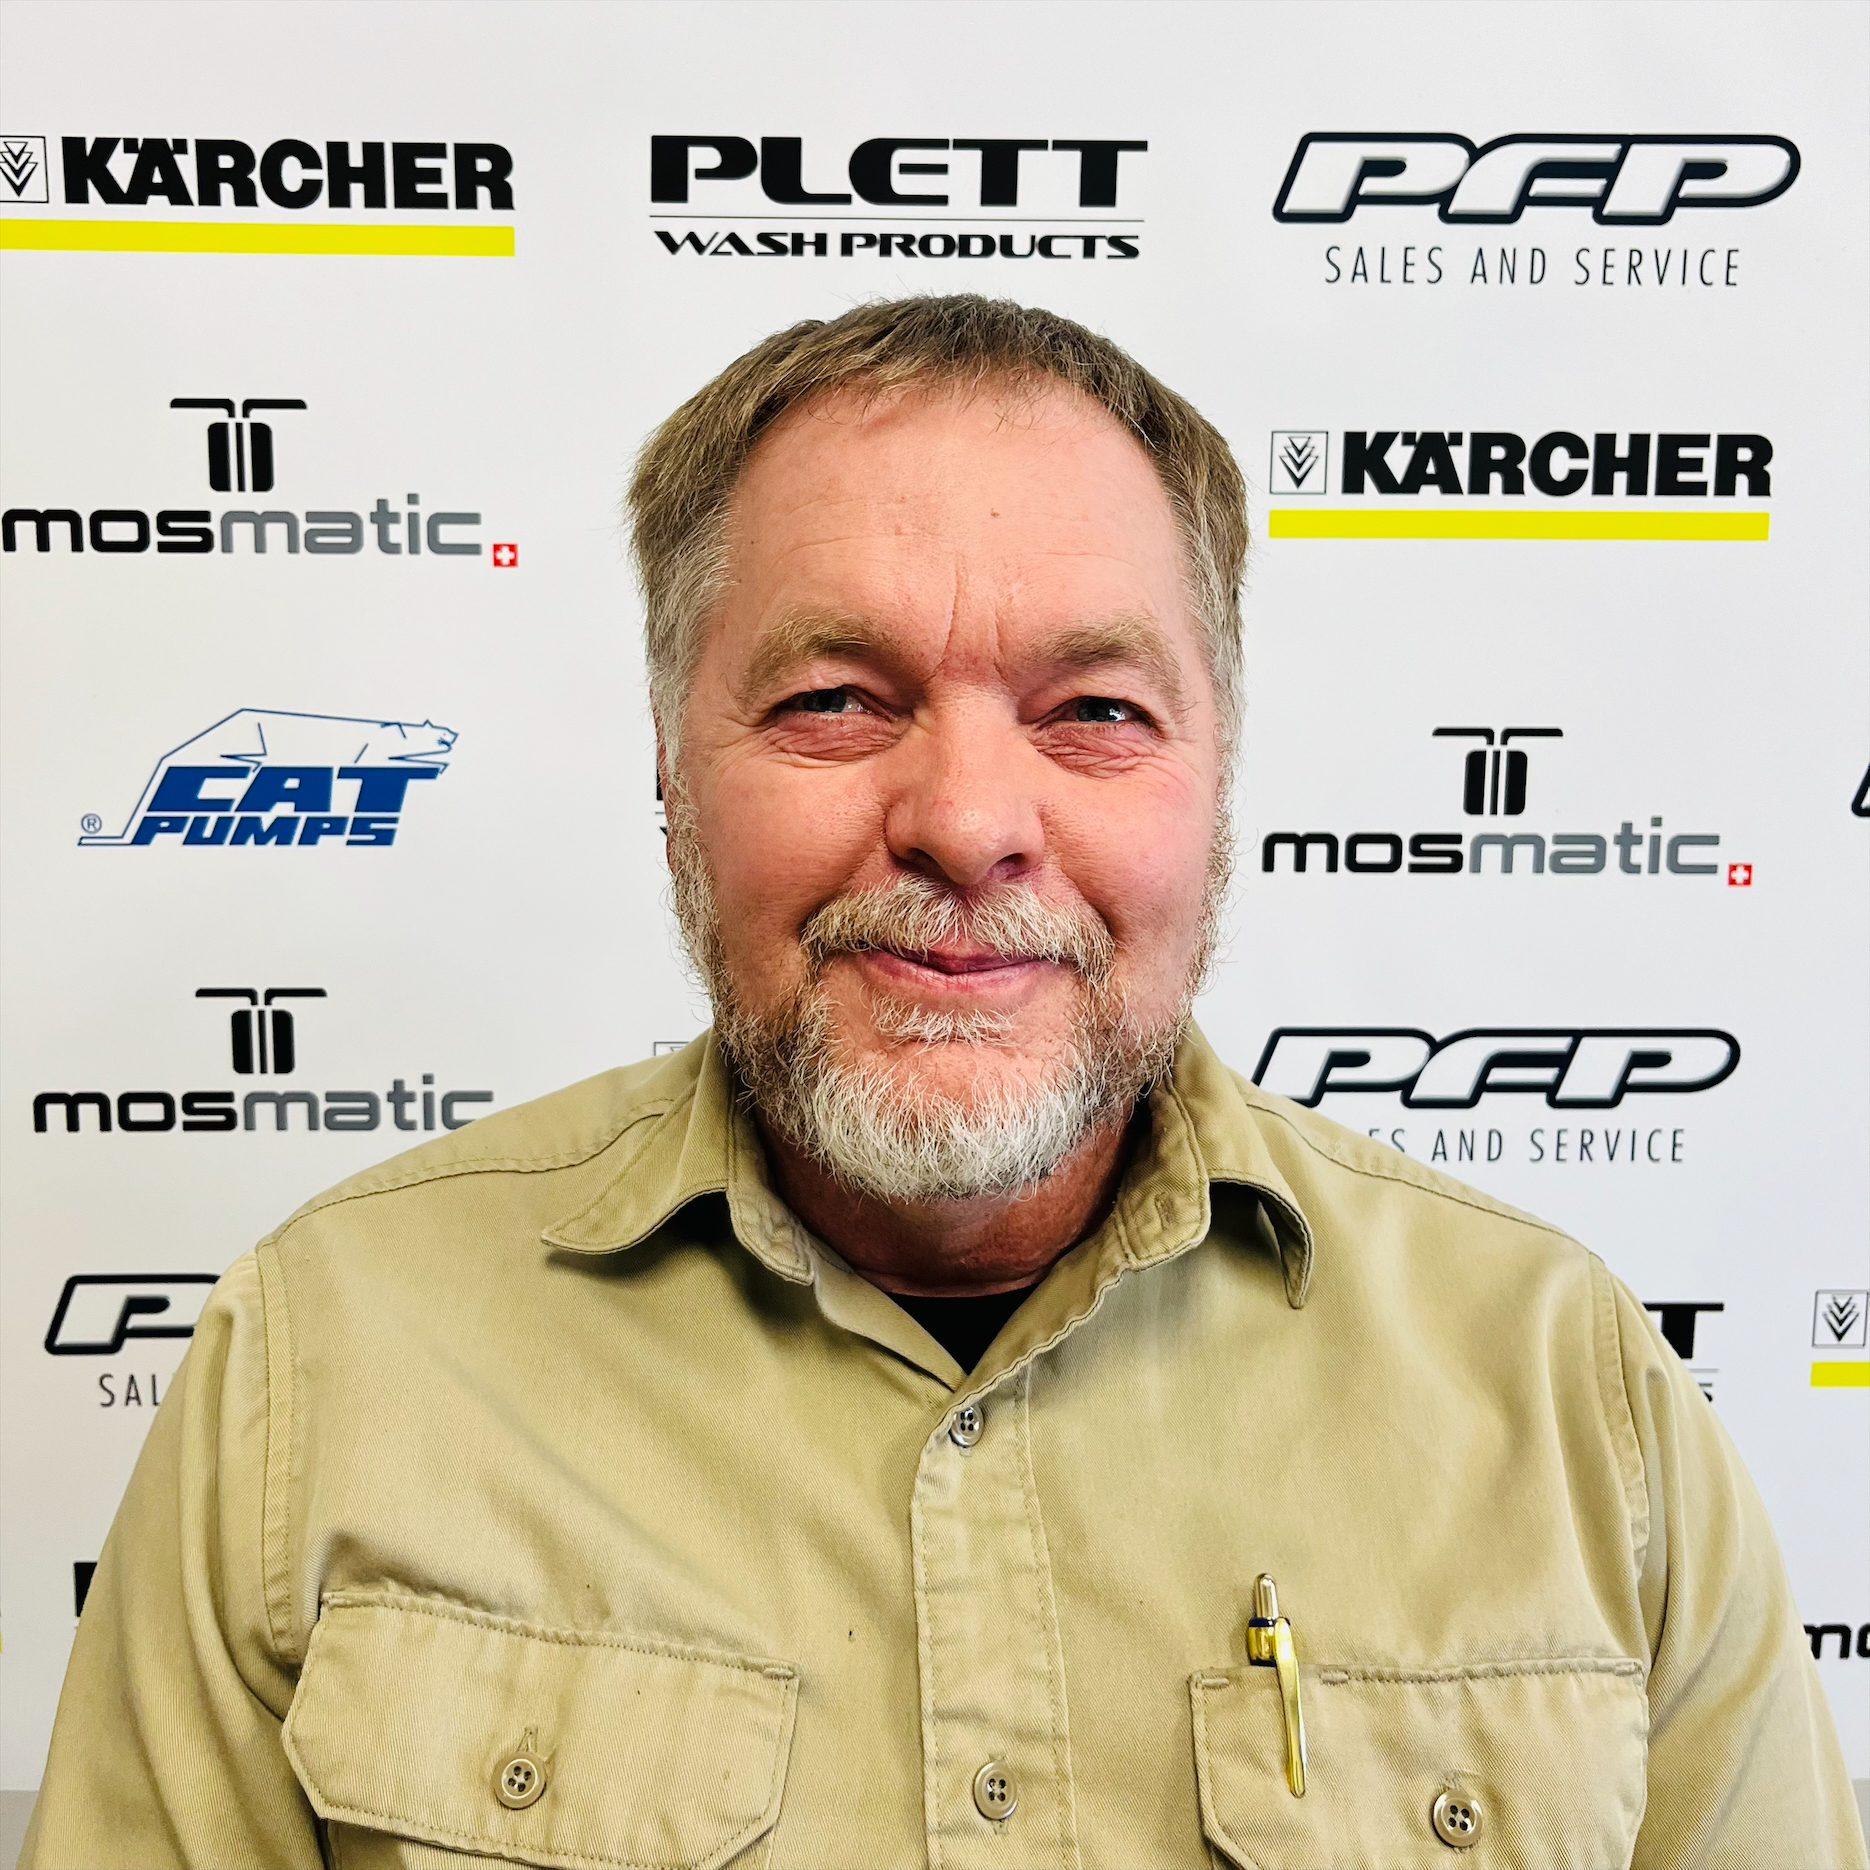 Frank Froese - Electric Motor Sales and Service